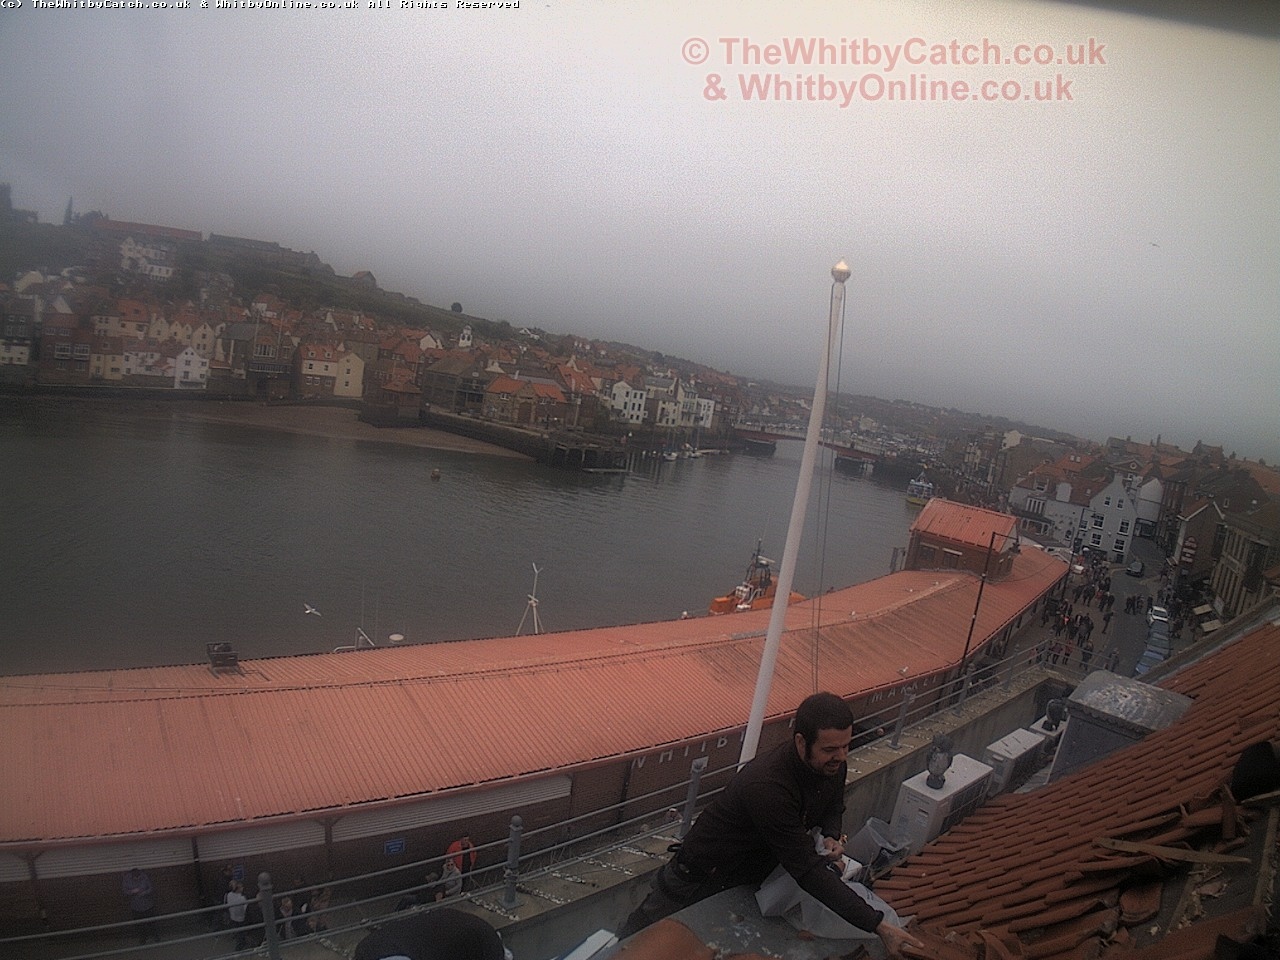 Whitby Mon 1st May 2017 11:50.